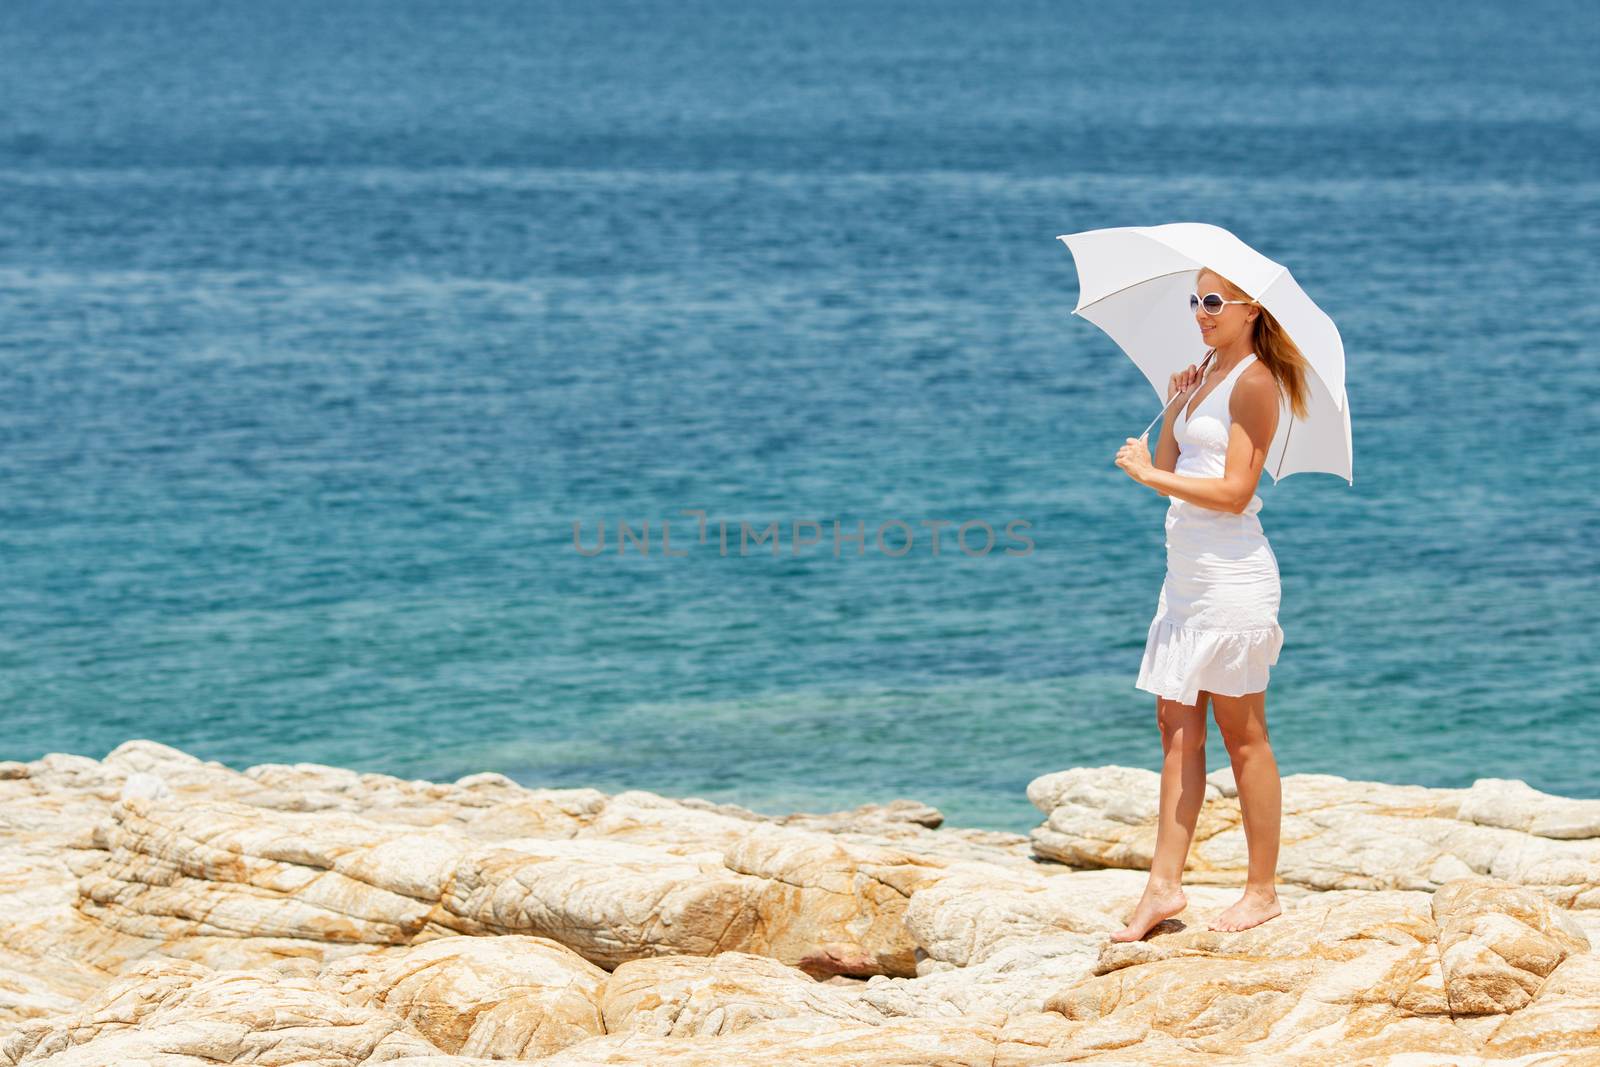 Beautiful Young Woman with white umbrella walking barefooted on stone beach.